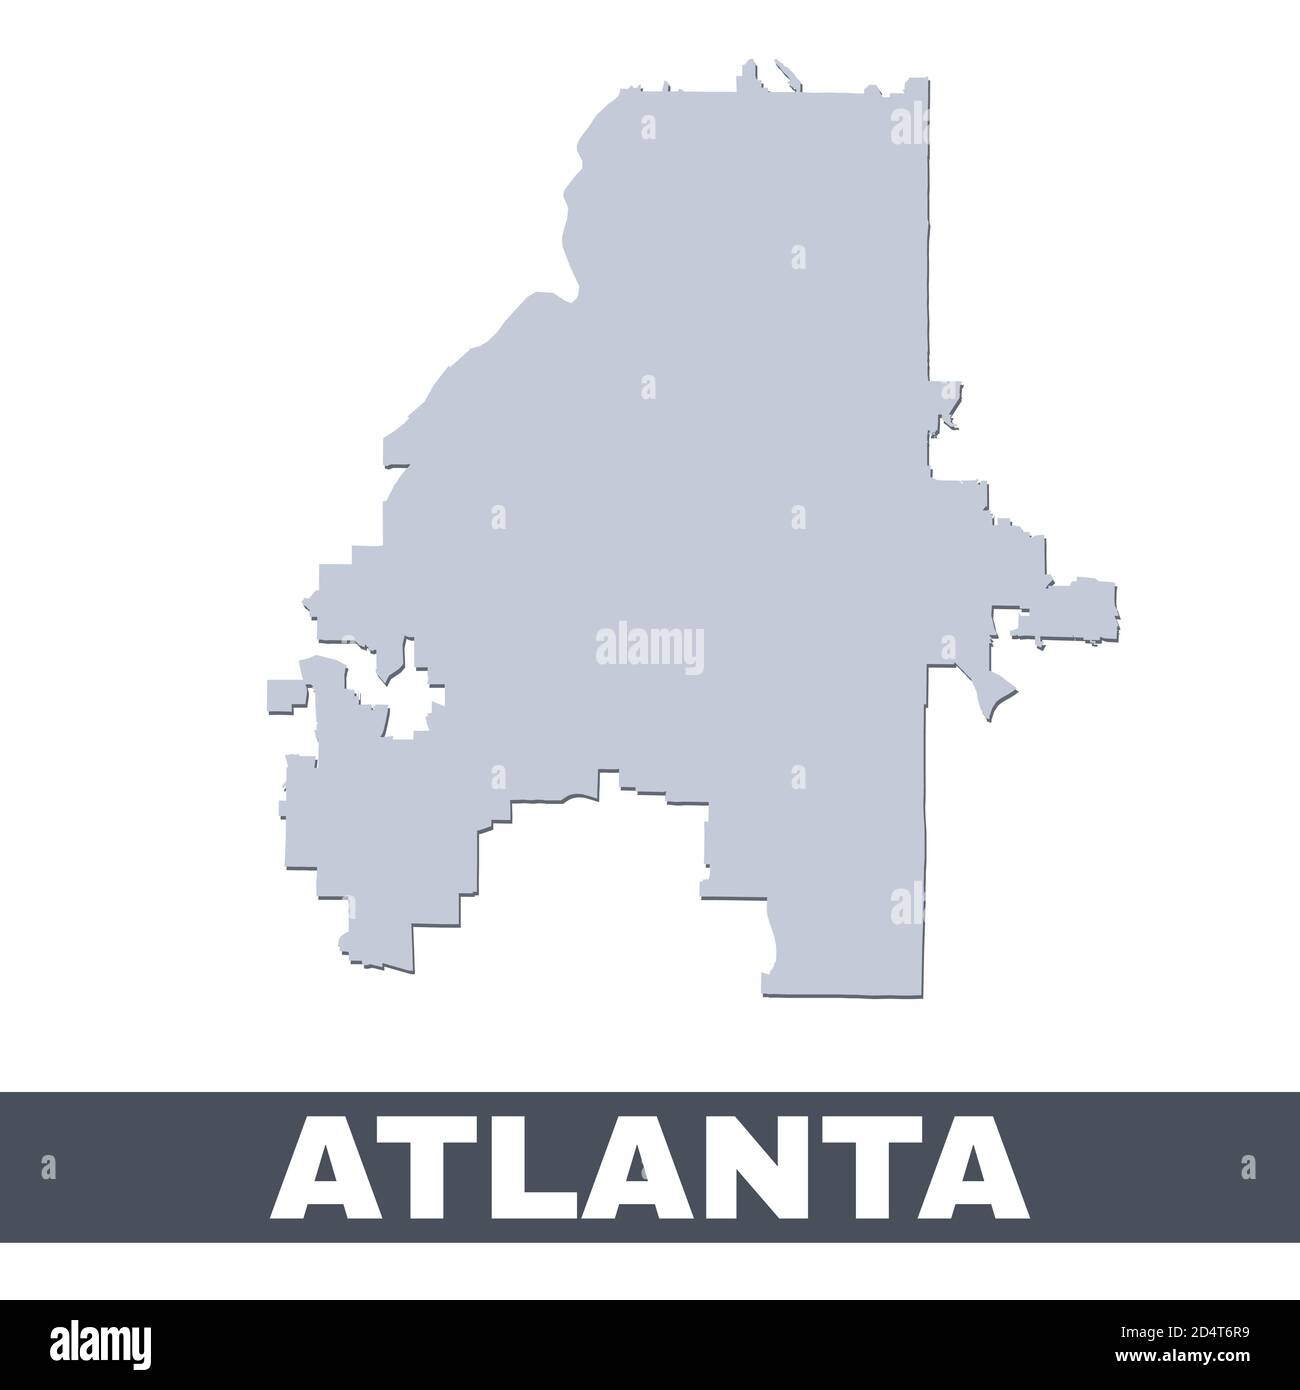 Atlanta outline map. Vector map of Atlanta city area within its borders. Grey with shadow on white background. Isolated illustration. Stock Vector